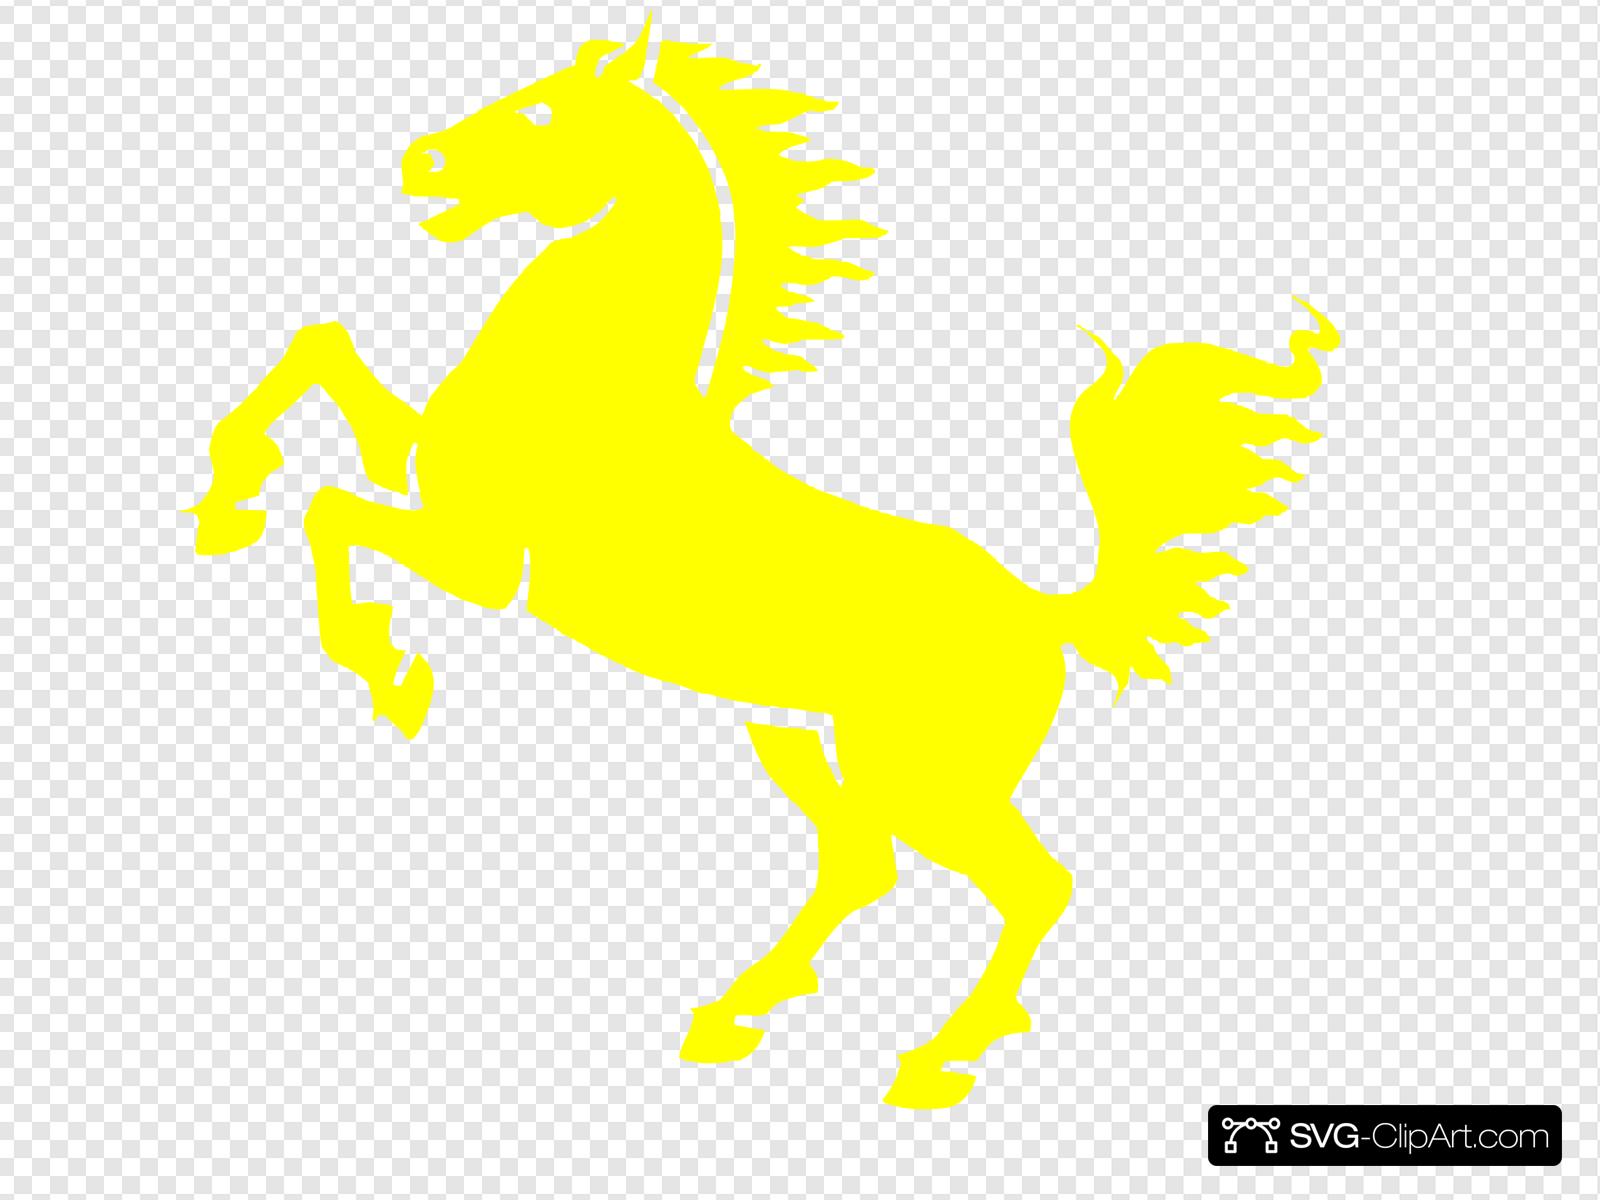 Yellow Mustang Clip art, Icon and SVG